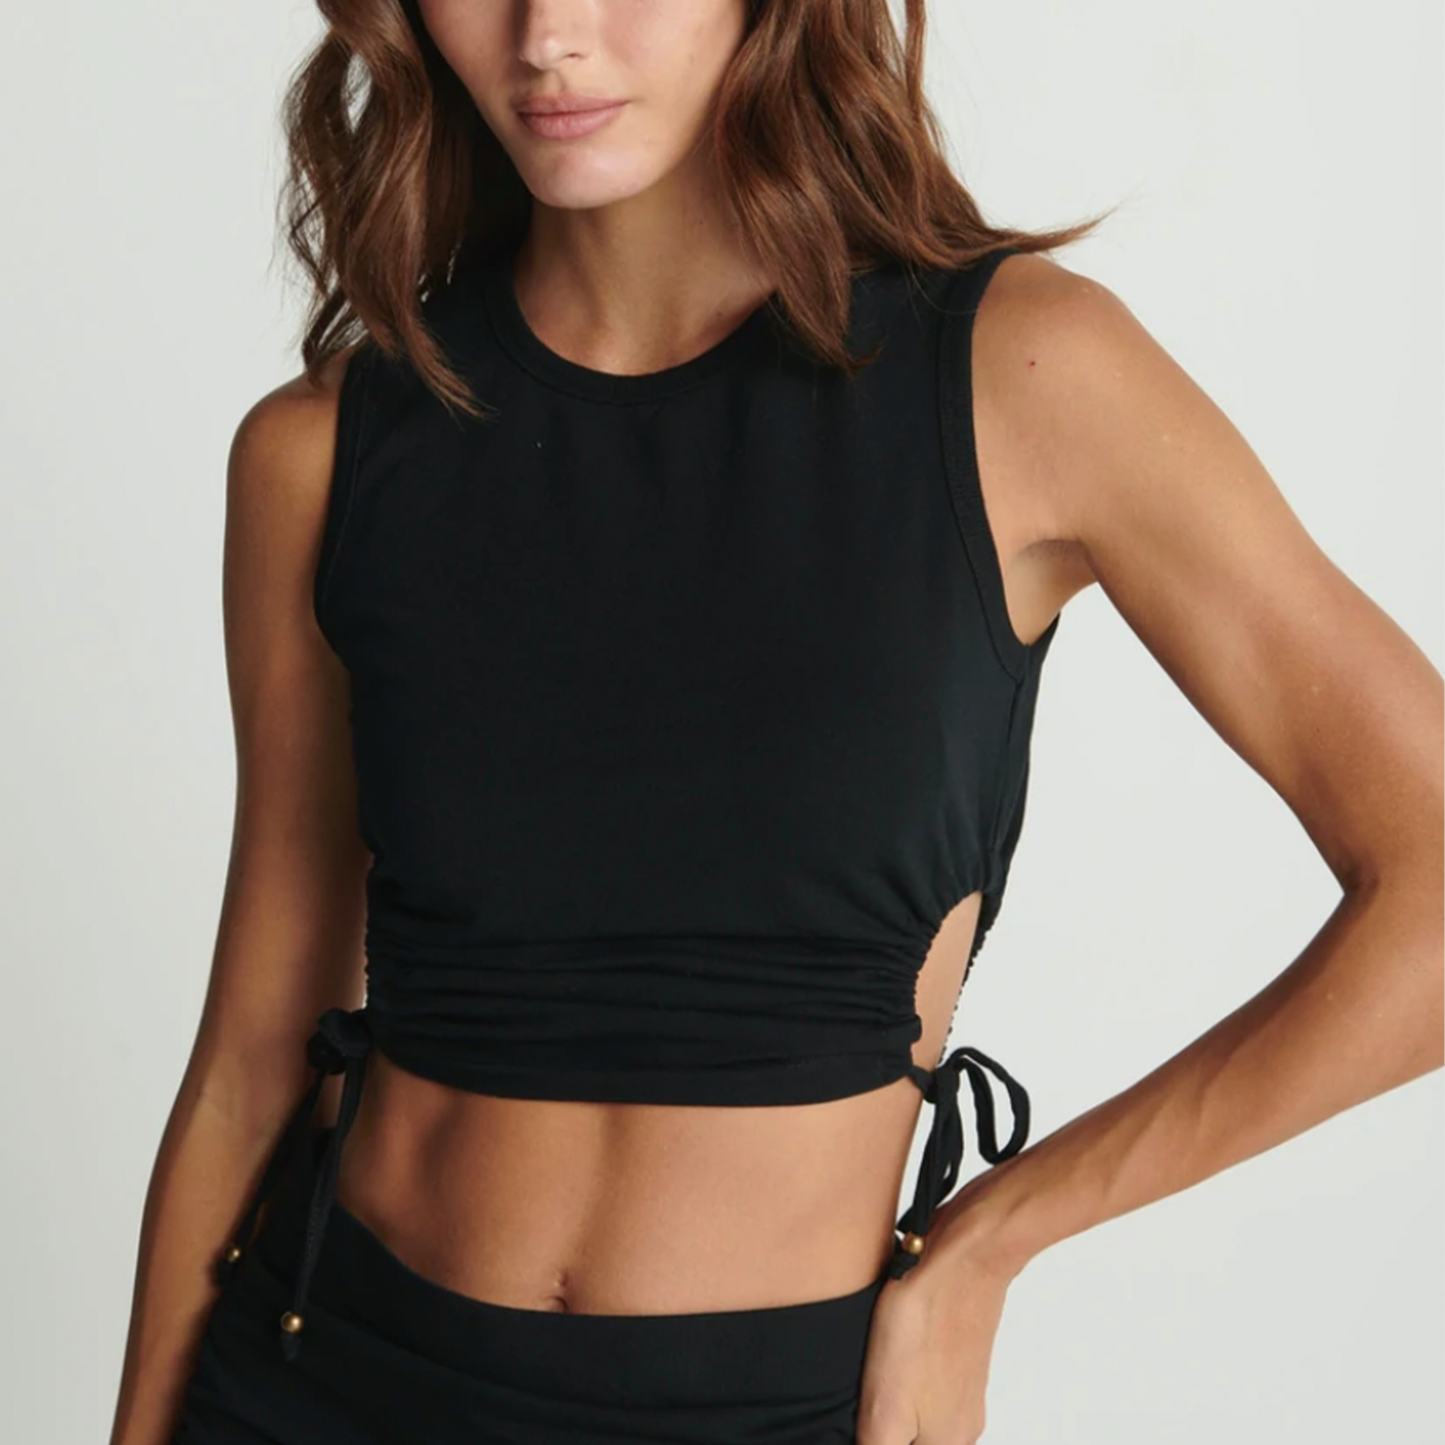 Sundays Kira Top MSRP$154. Effortlessly casual top that pairs perfectly with jeans or athletic wear. Rock the cool cut outs for a unique shirt style thats a cut above the rest